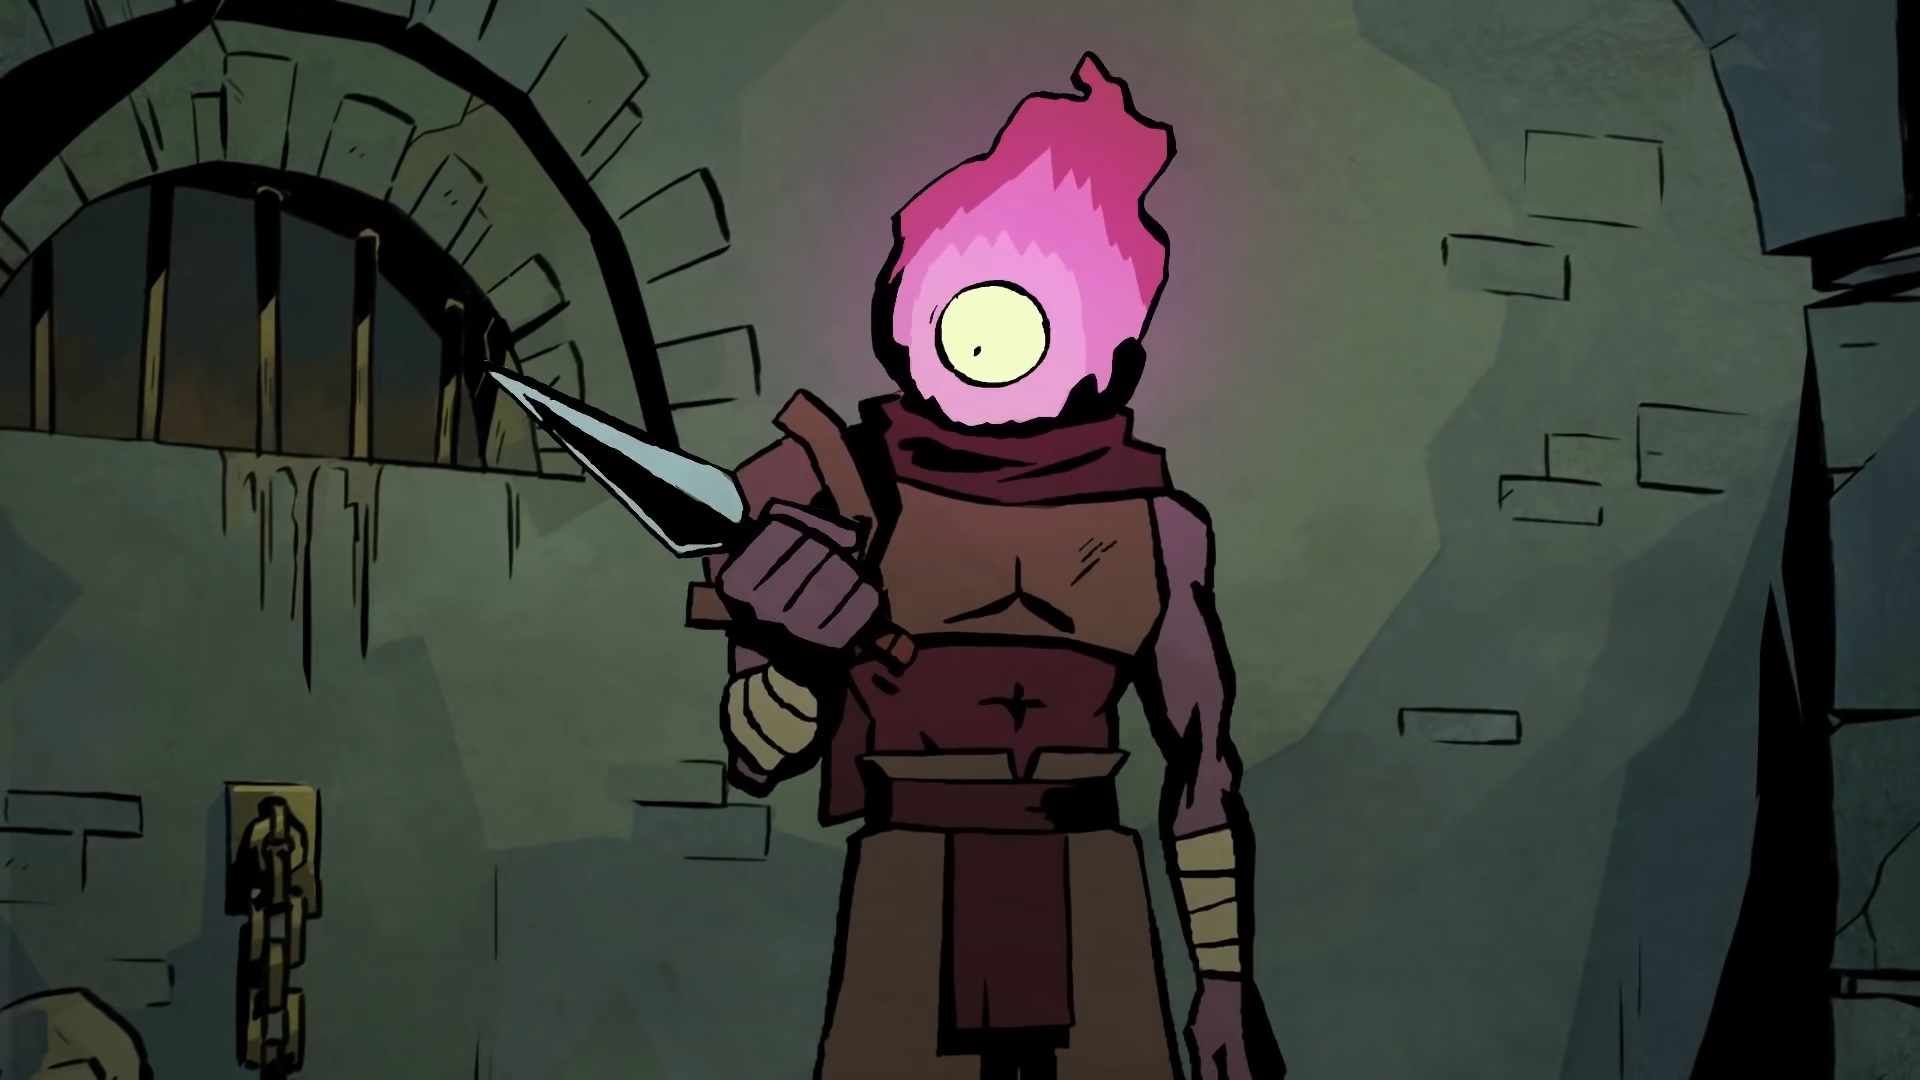 Dead Cells Still Getting Tons Of Cool Updates Four Years Later